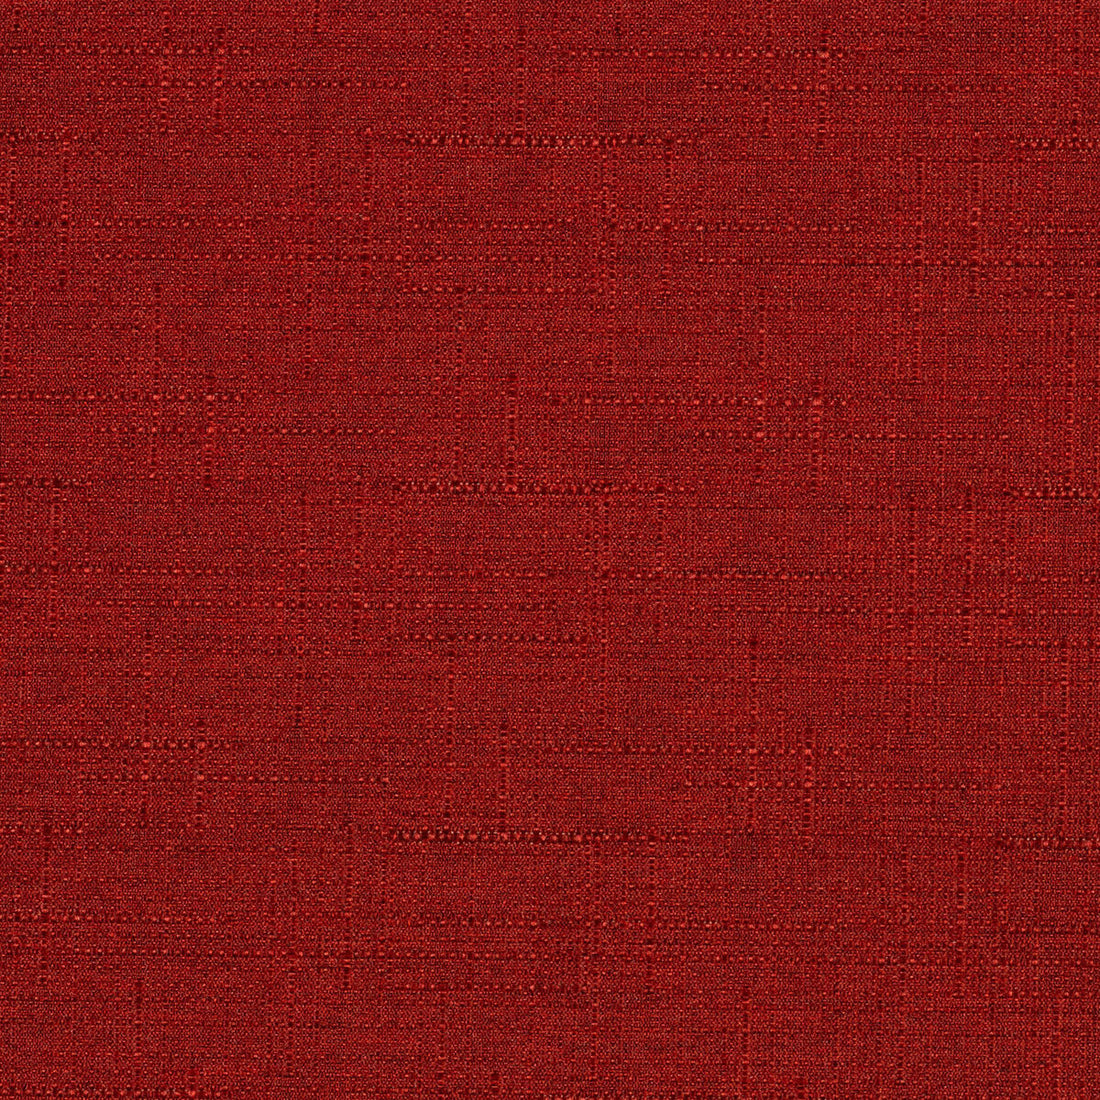 Kravet Contract fabric in 4321-19 color - pattern 4321.19.0 - by Kravet Contract